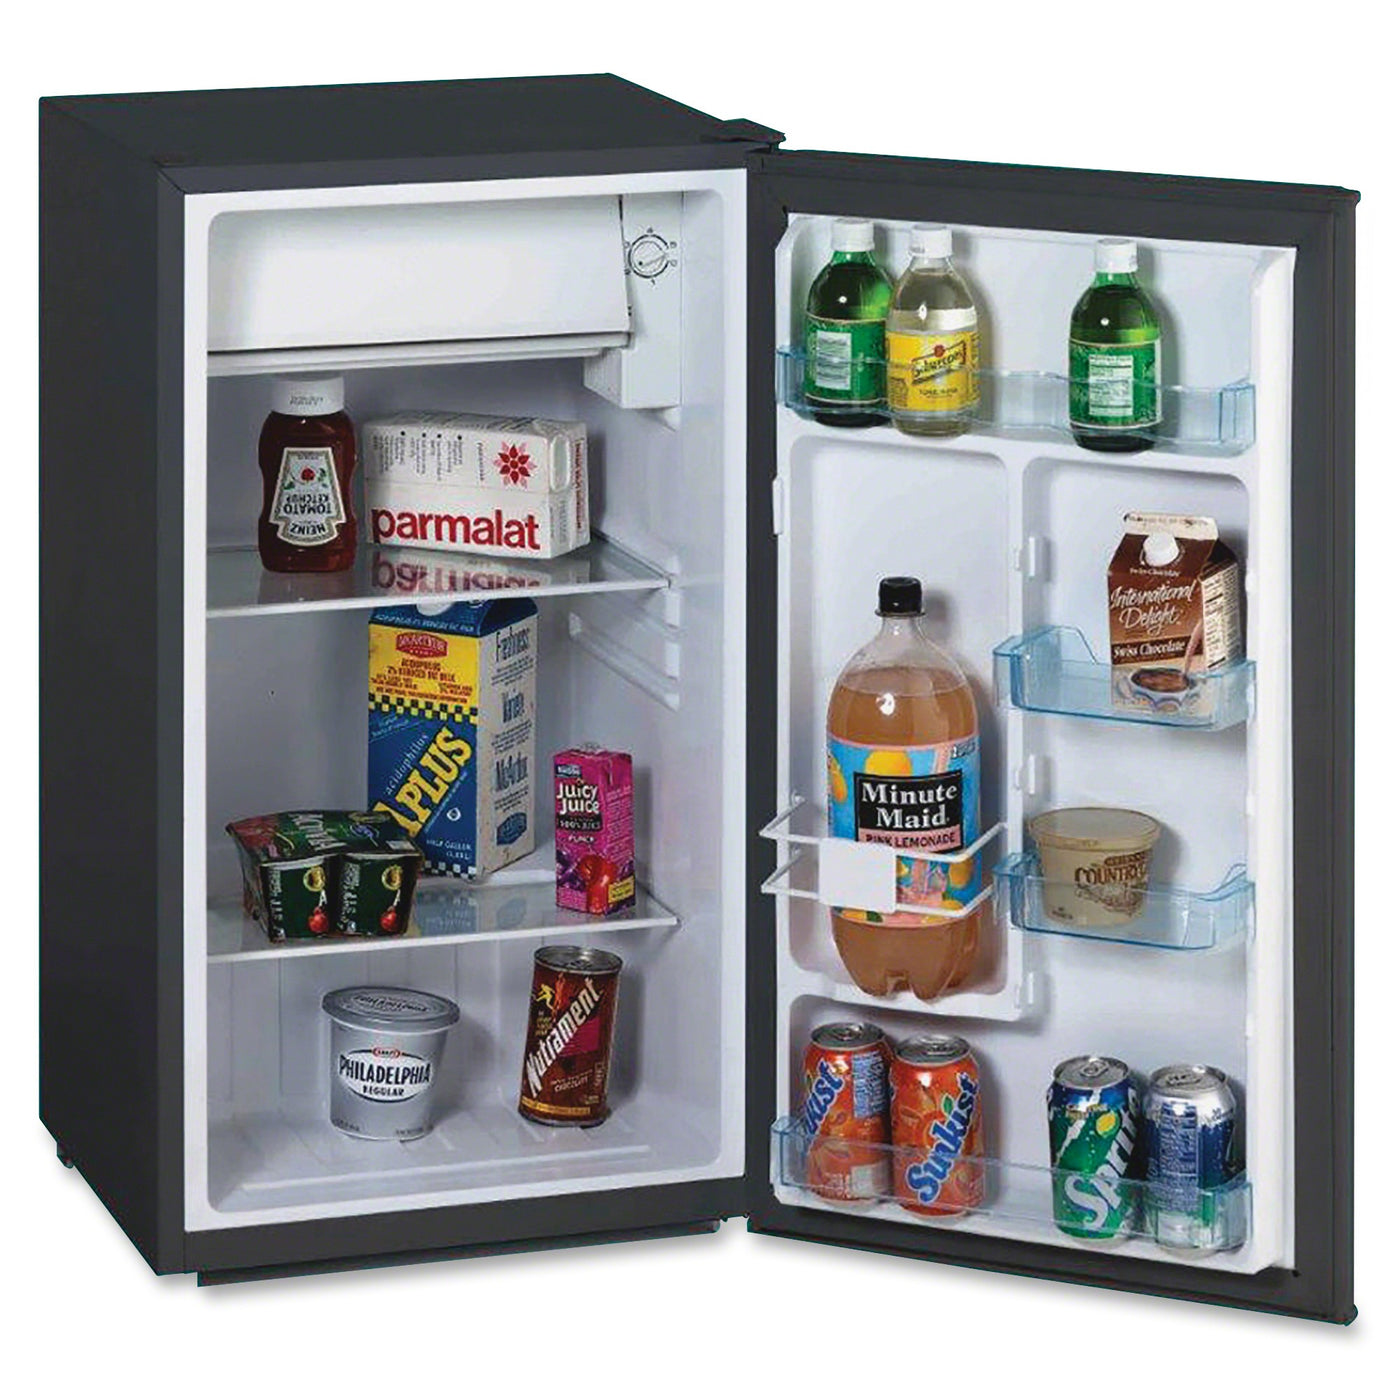 Avanti RM3316B Refrigerator with Chiller Compartment, 3.3 Cu. Ft with Warranty